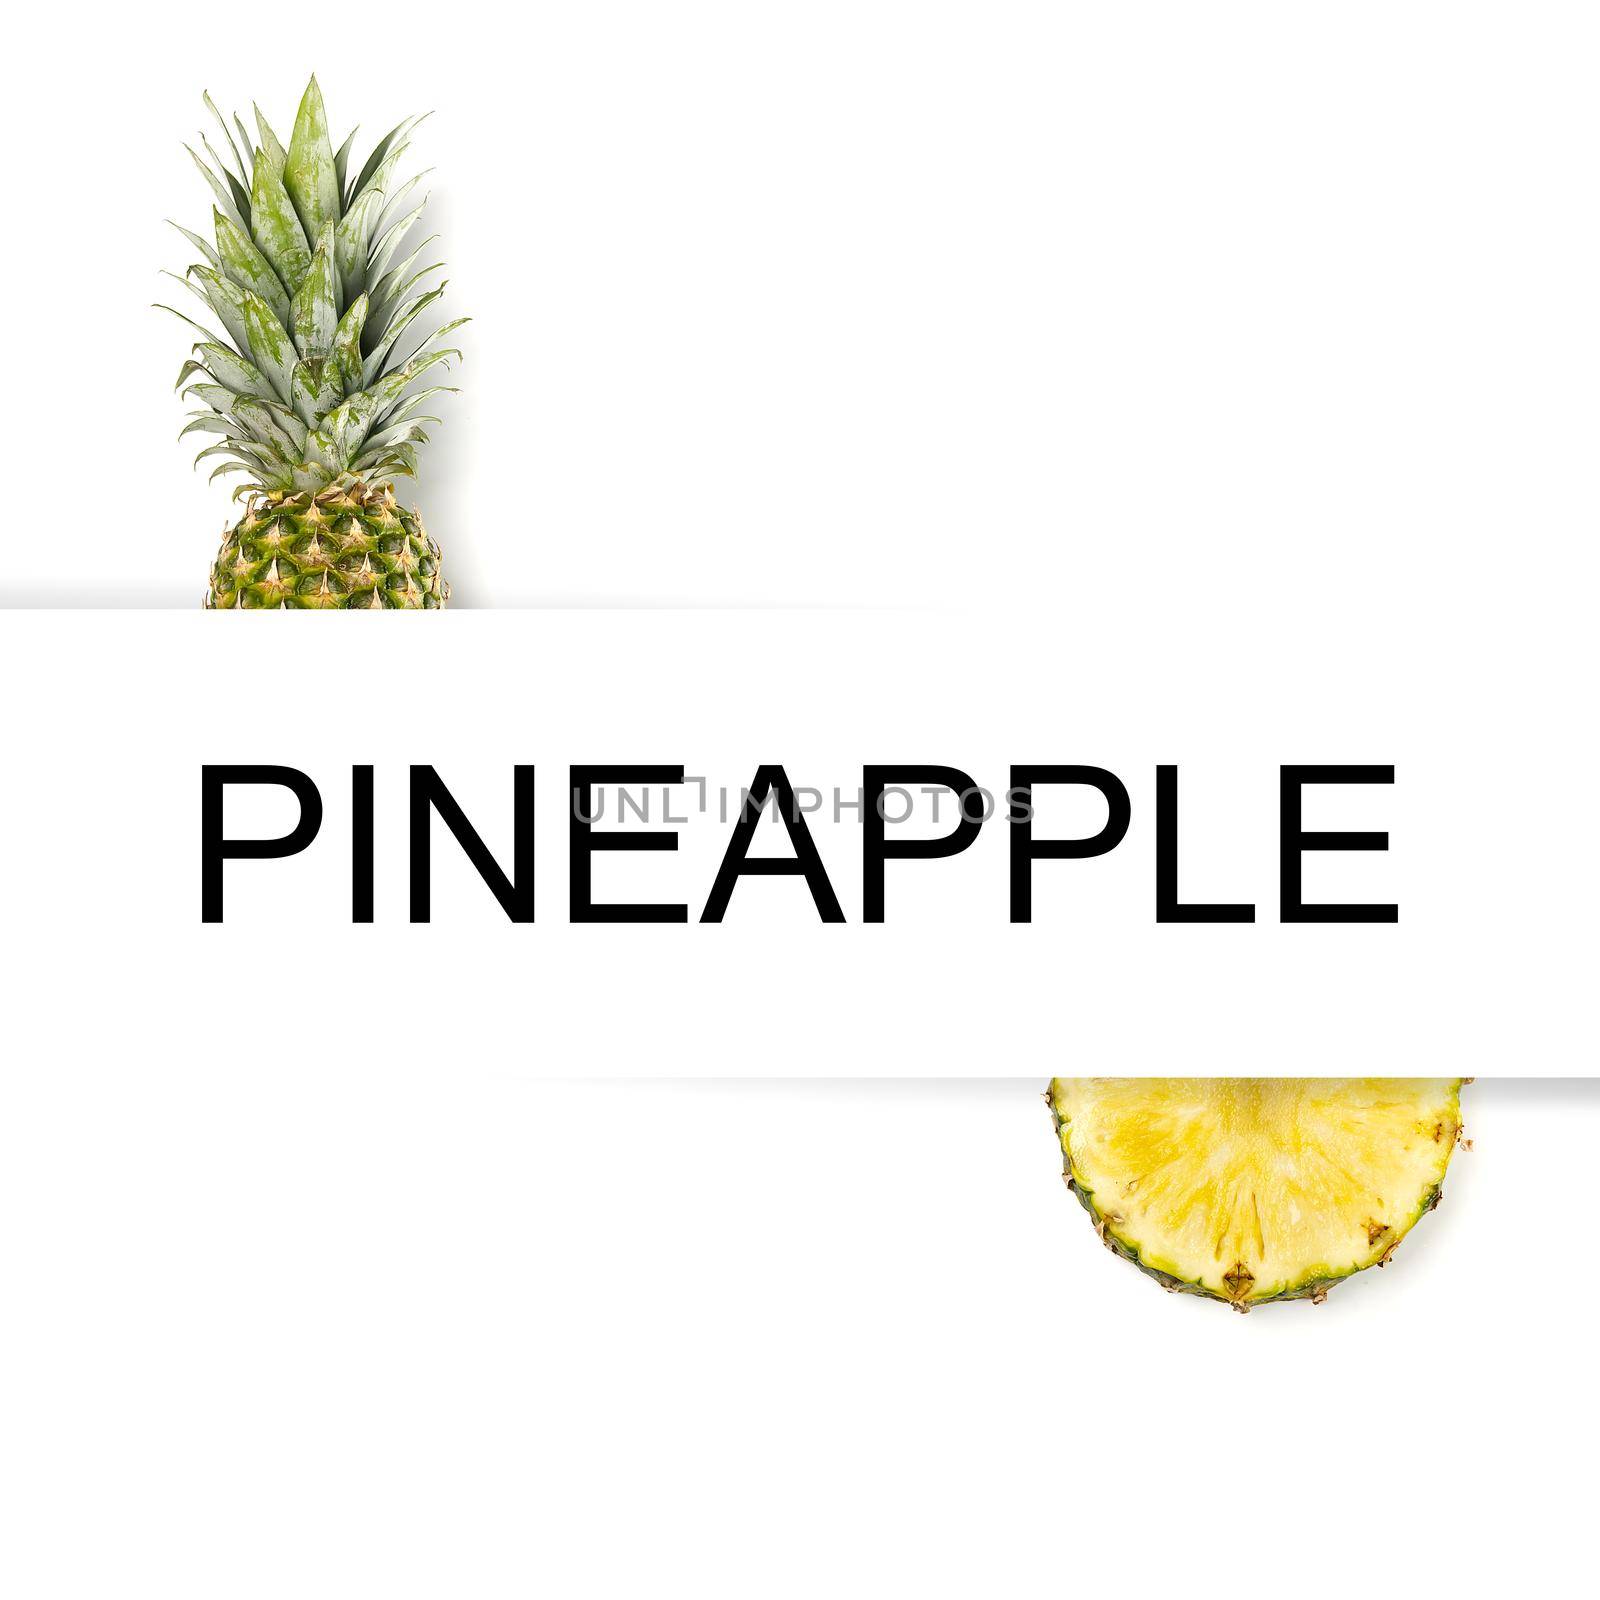 Pineapple creative layout. Pineapple on white background. Tropical fruits modern concept.